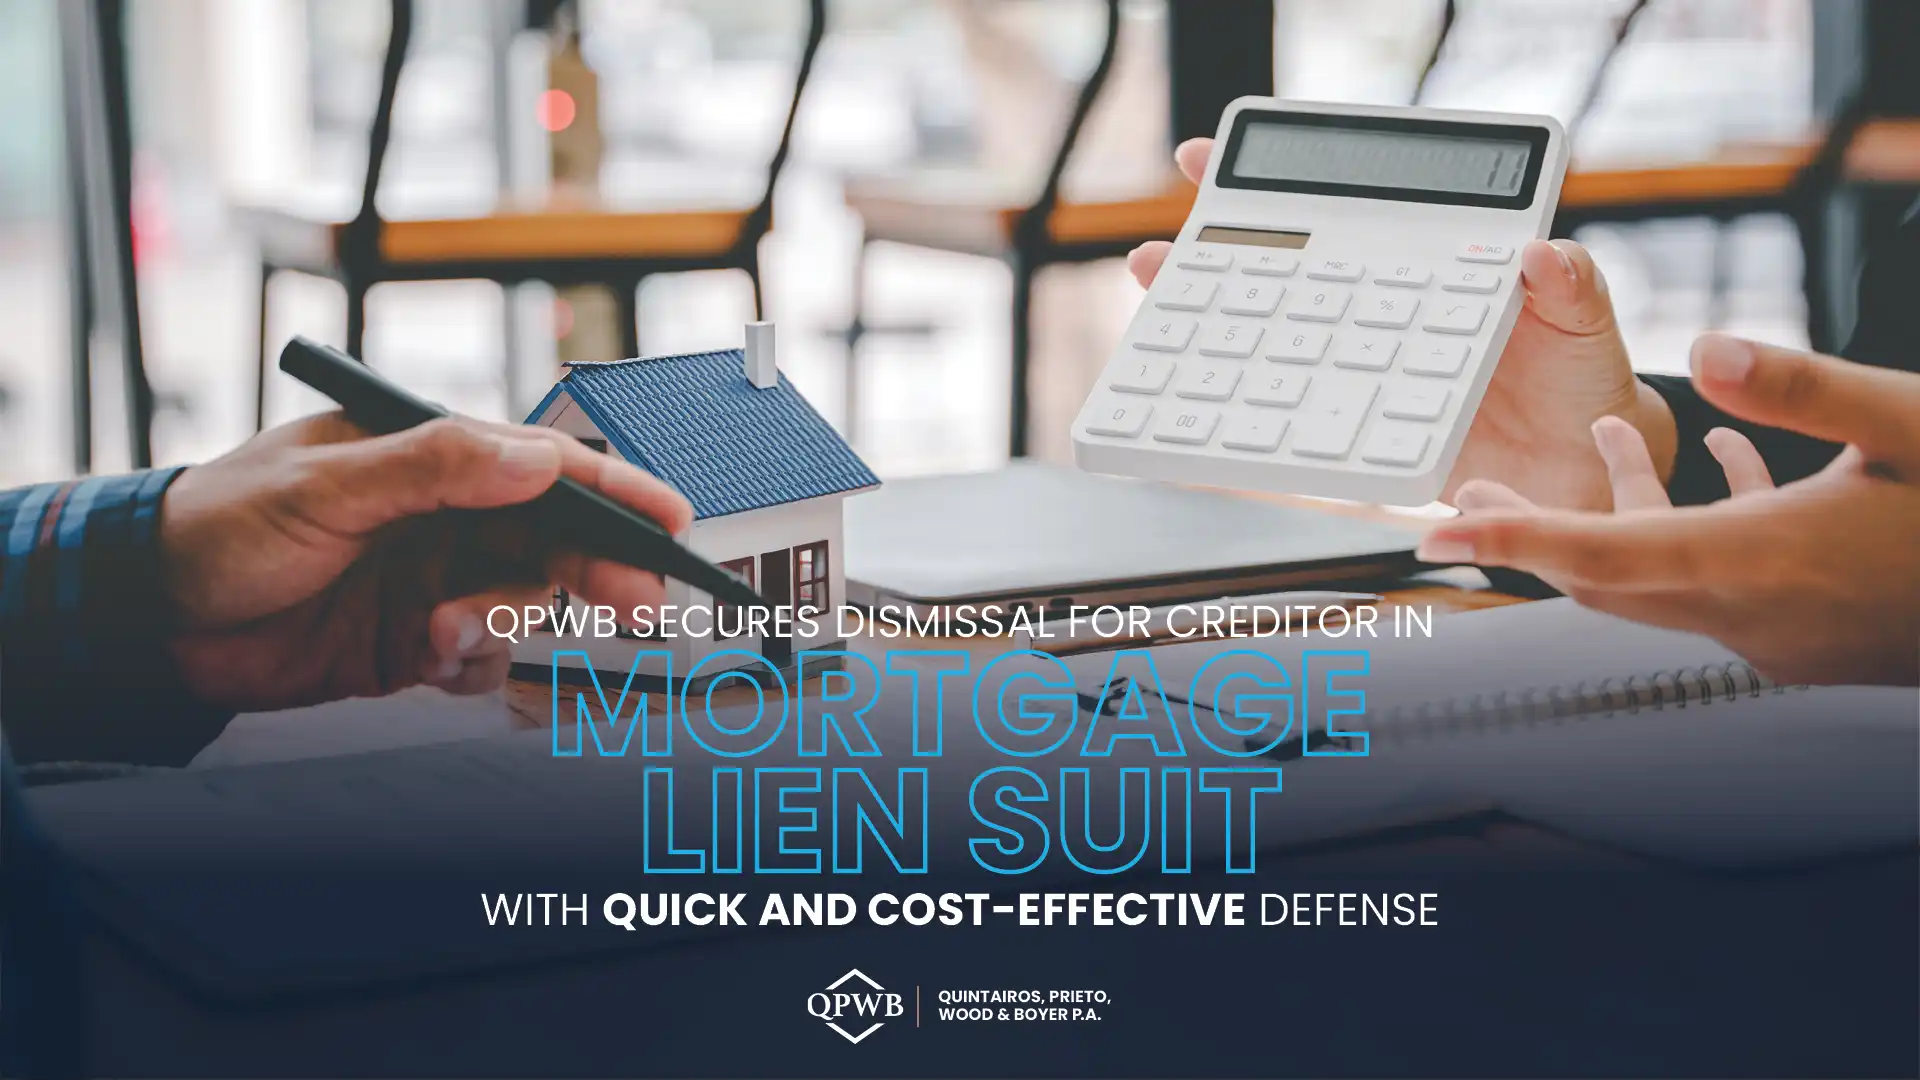 QPWB Secures Dismissal for Creditor in Mortgage Lien Suit with Quick and Cost Effective Defense